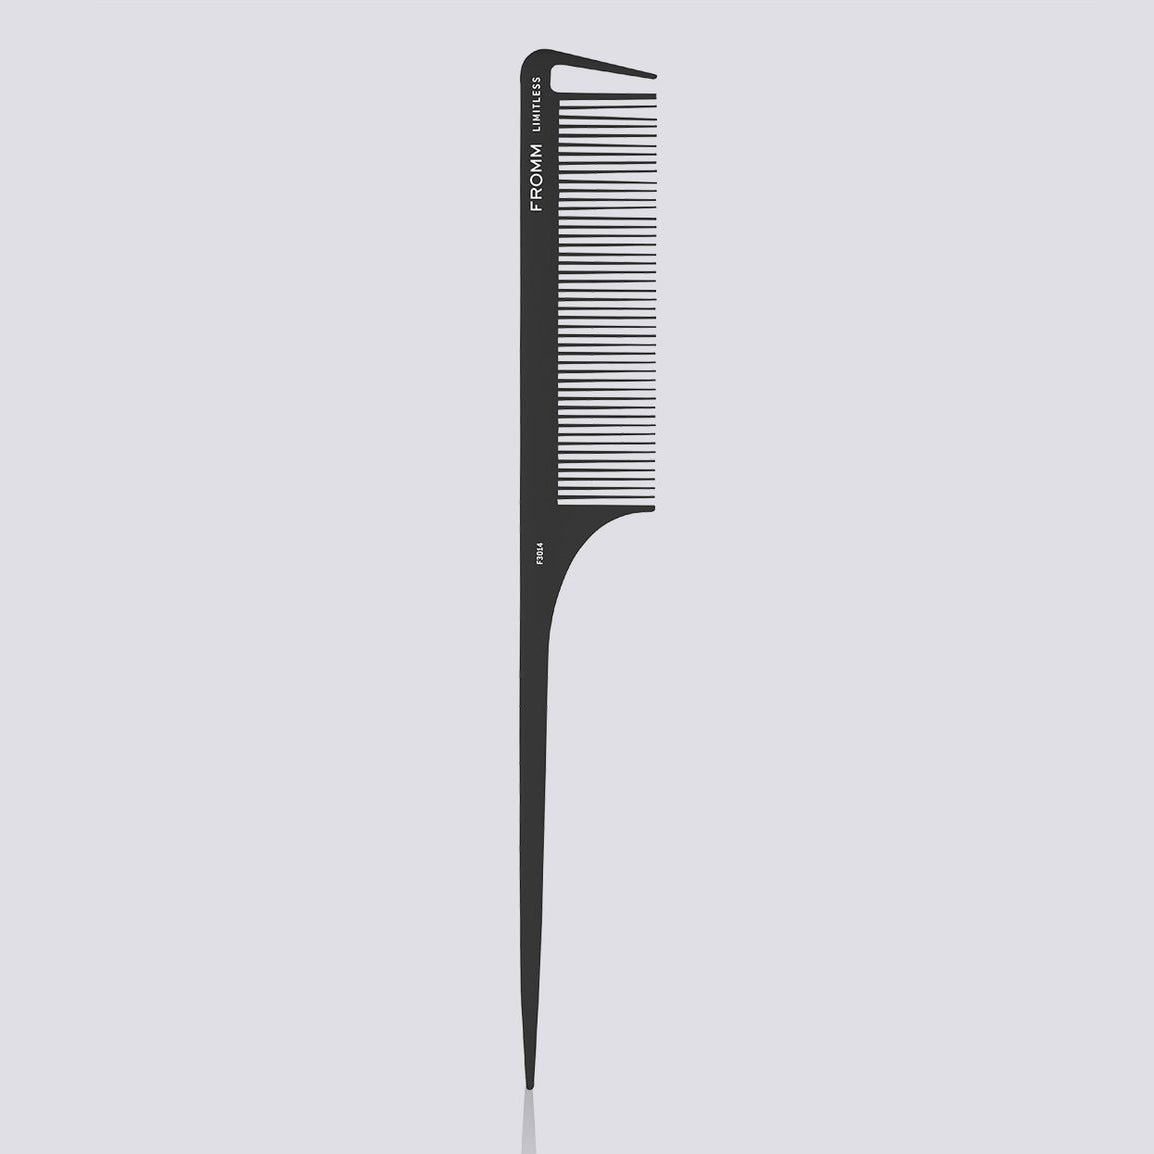 LIMITLESS 9.25" CARBON RAT TAIL COMB | F3014 | FROMM - SH Salons